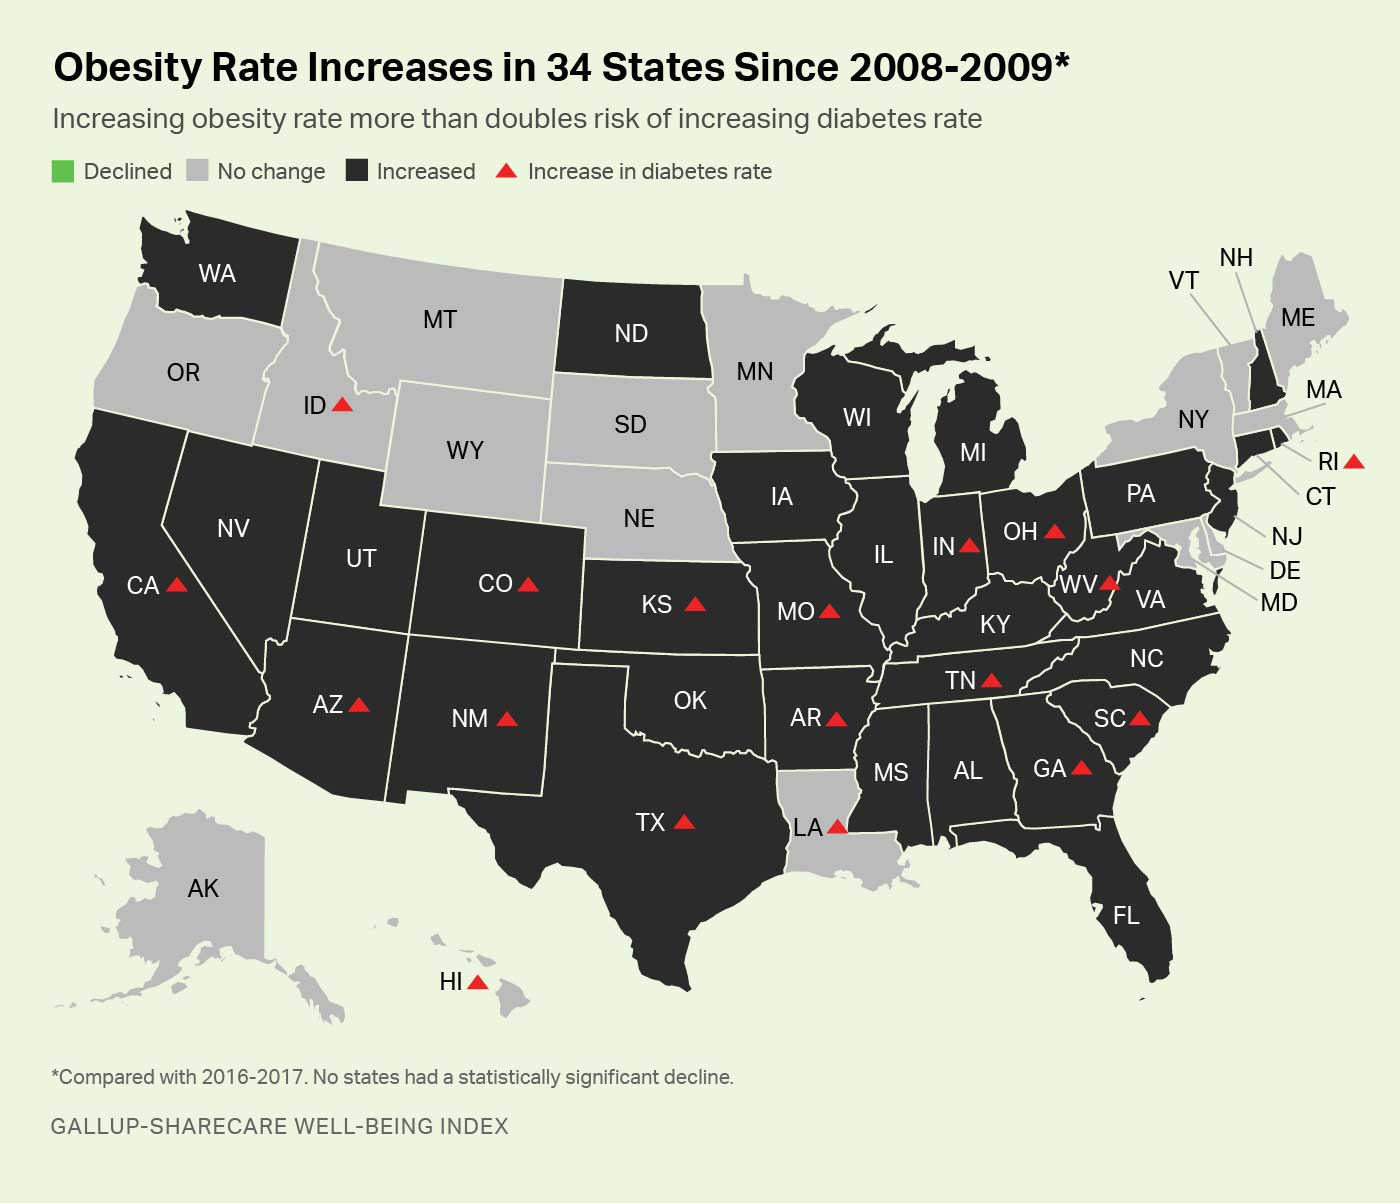 Map. Obesity rates increased in 34 states since 2008-2009; these rates have not declined in any U.S. state.